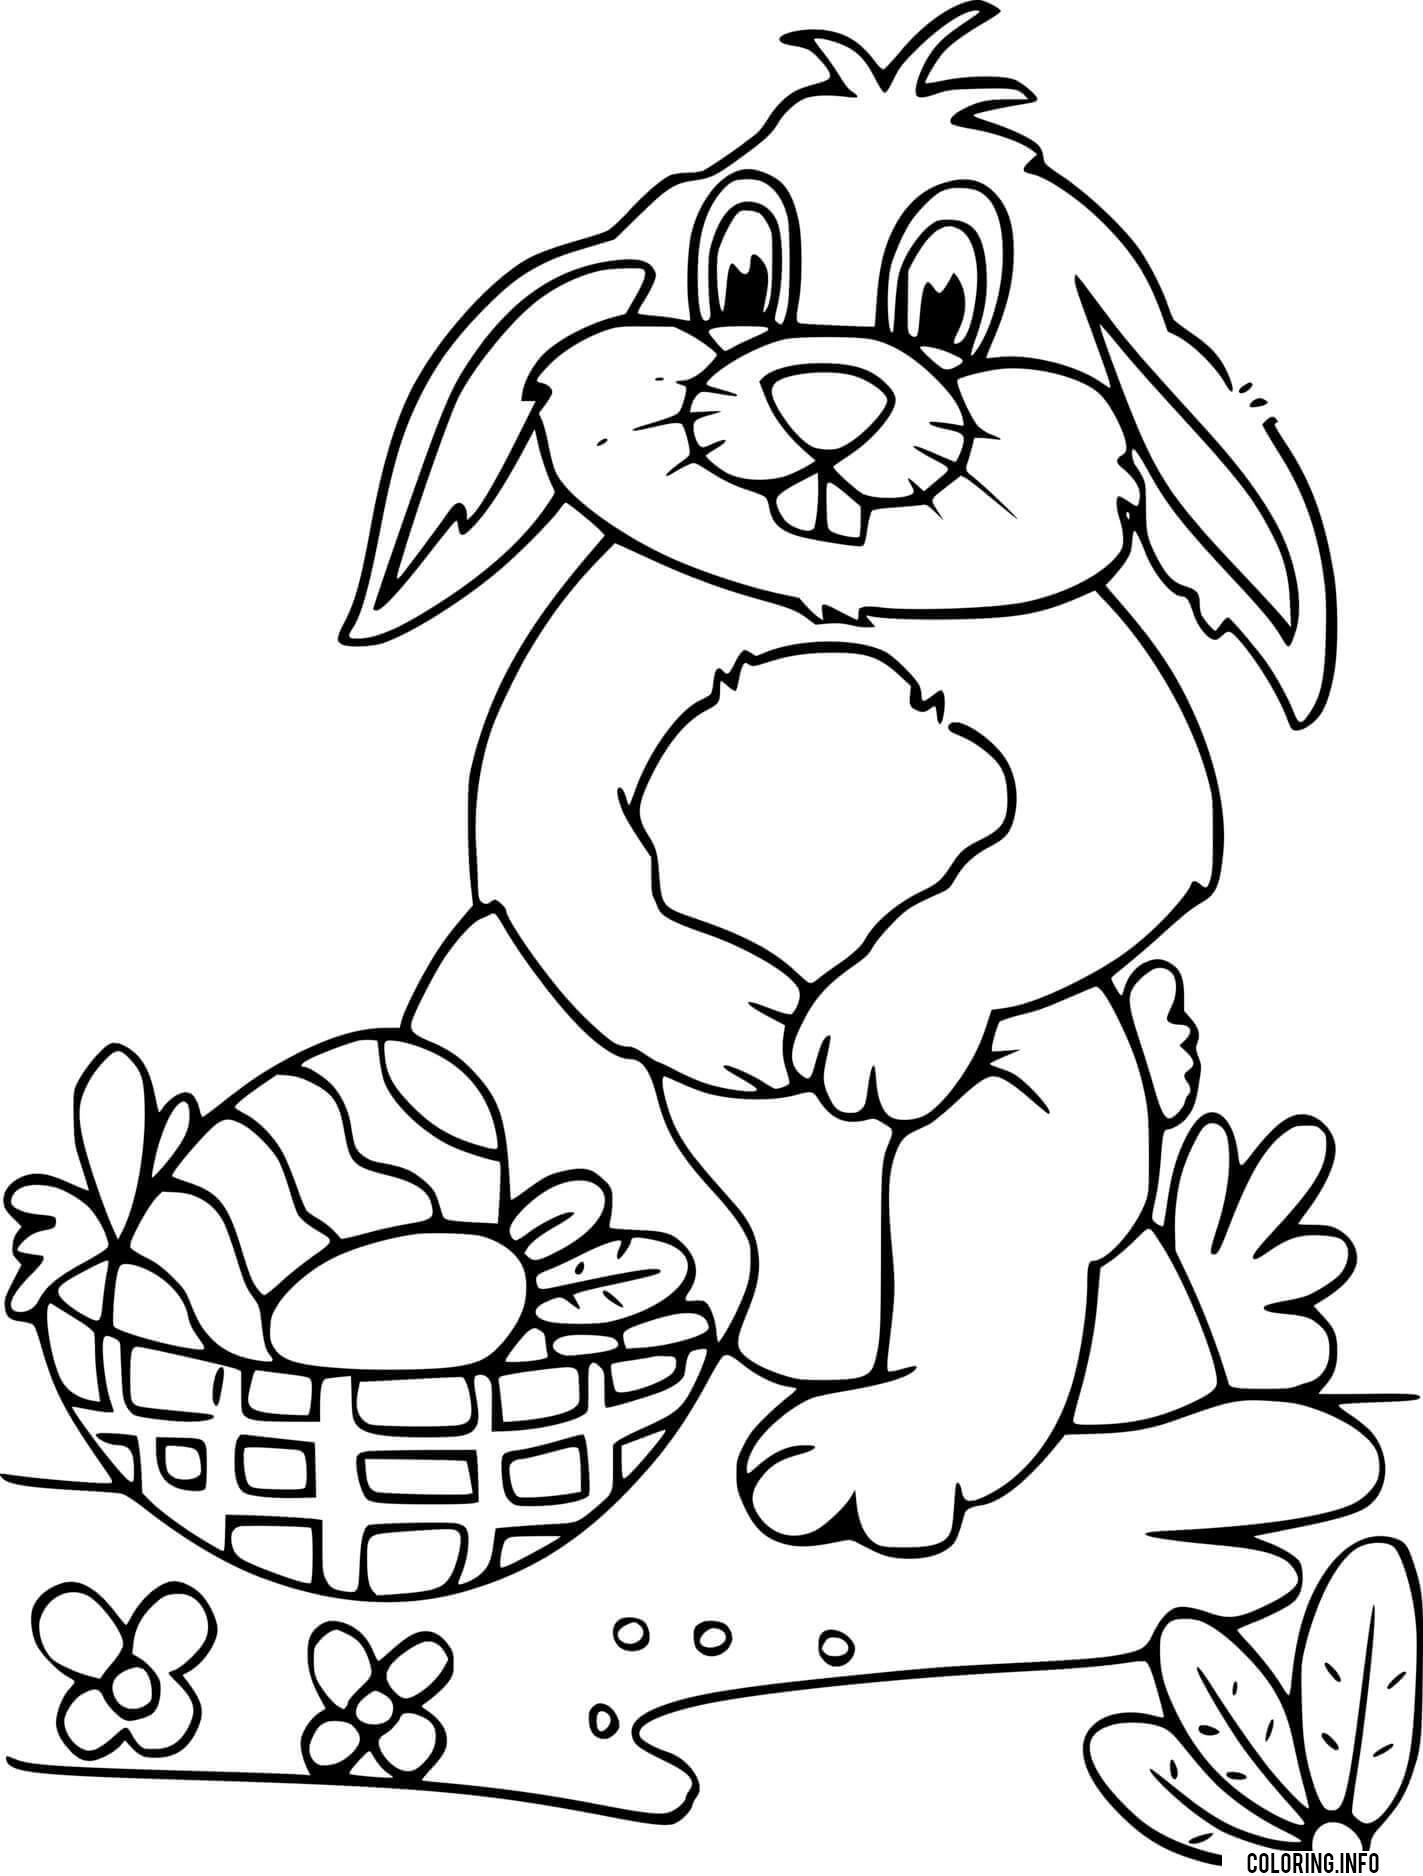 Easter Bunny Sits On The Ground Coloring page Printable